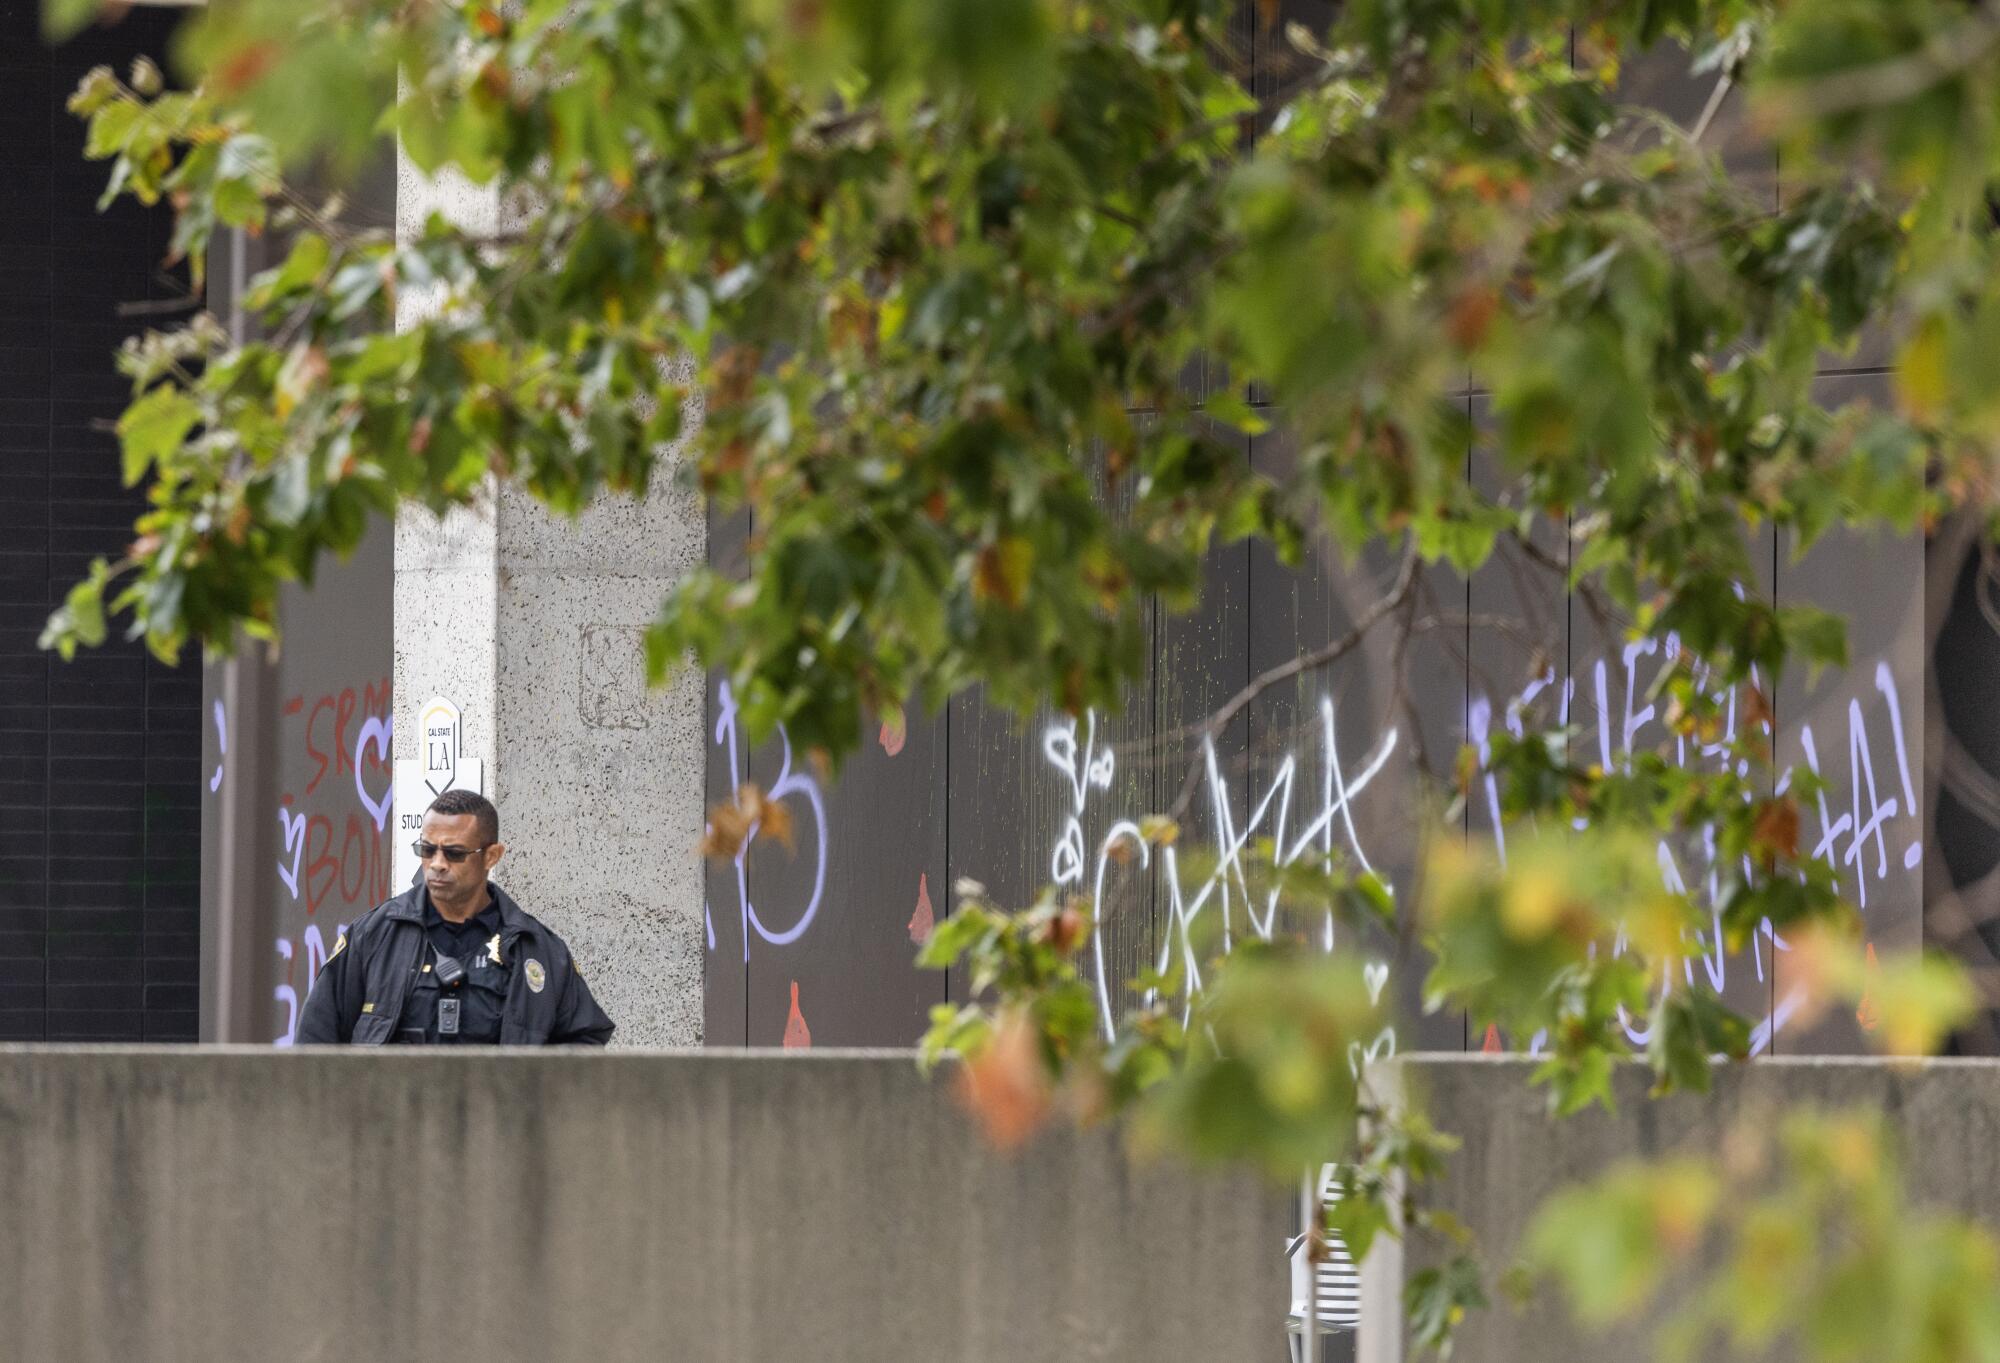 A police officer stands watch outside the student services building at Cal State Los Angeles.